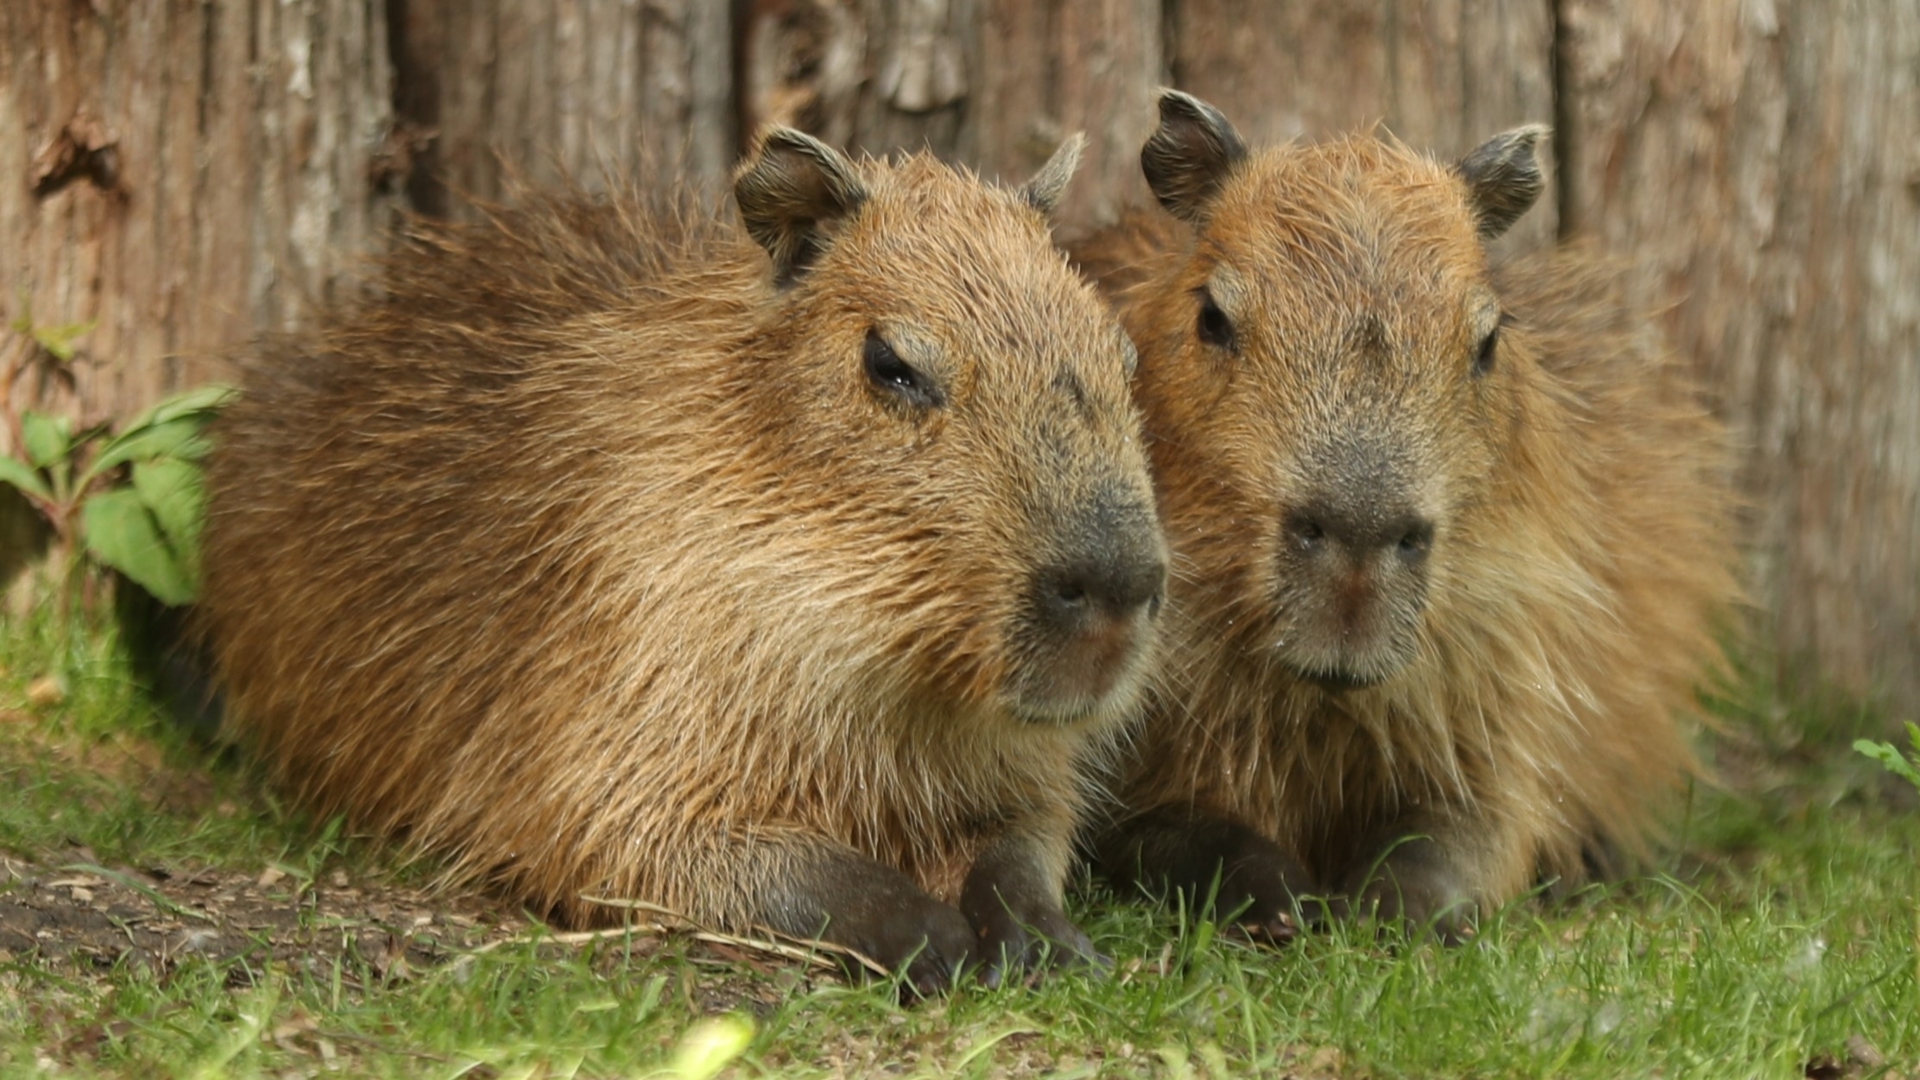 African Safari Wildlife Park in Port Clinton is the first spot in northwest Ohio to add Capybara Encounters. 2-month-old Arepa and Torta will soon be ready to visit!